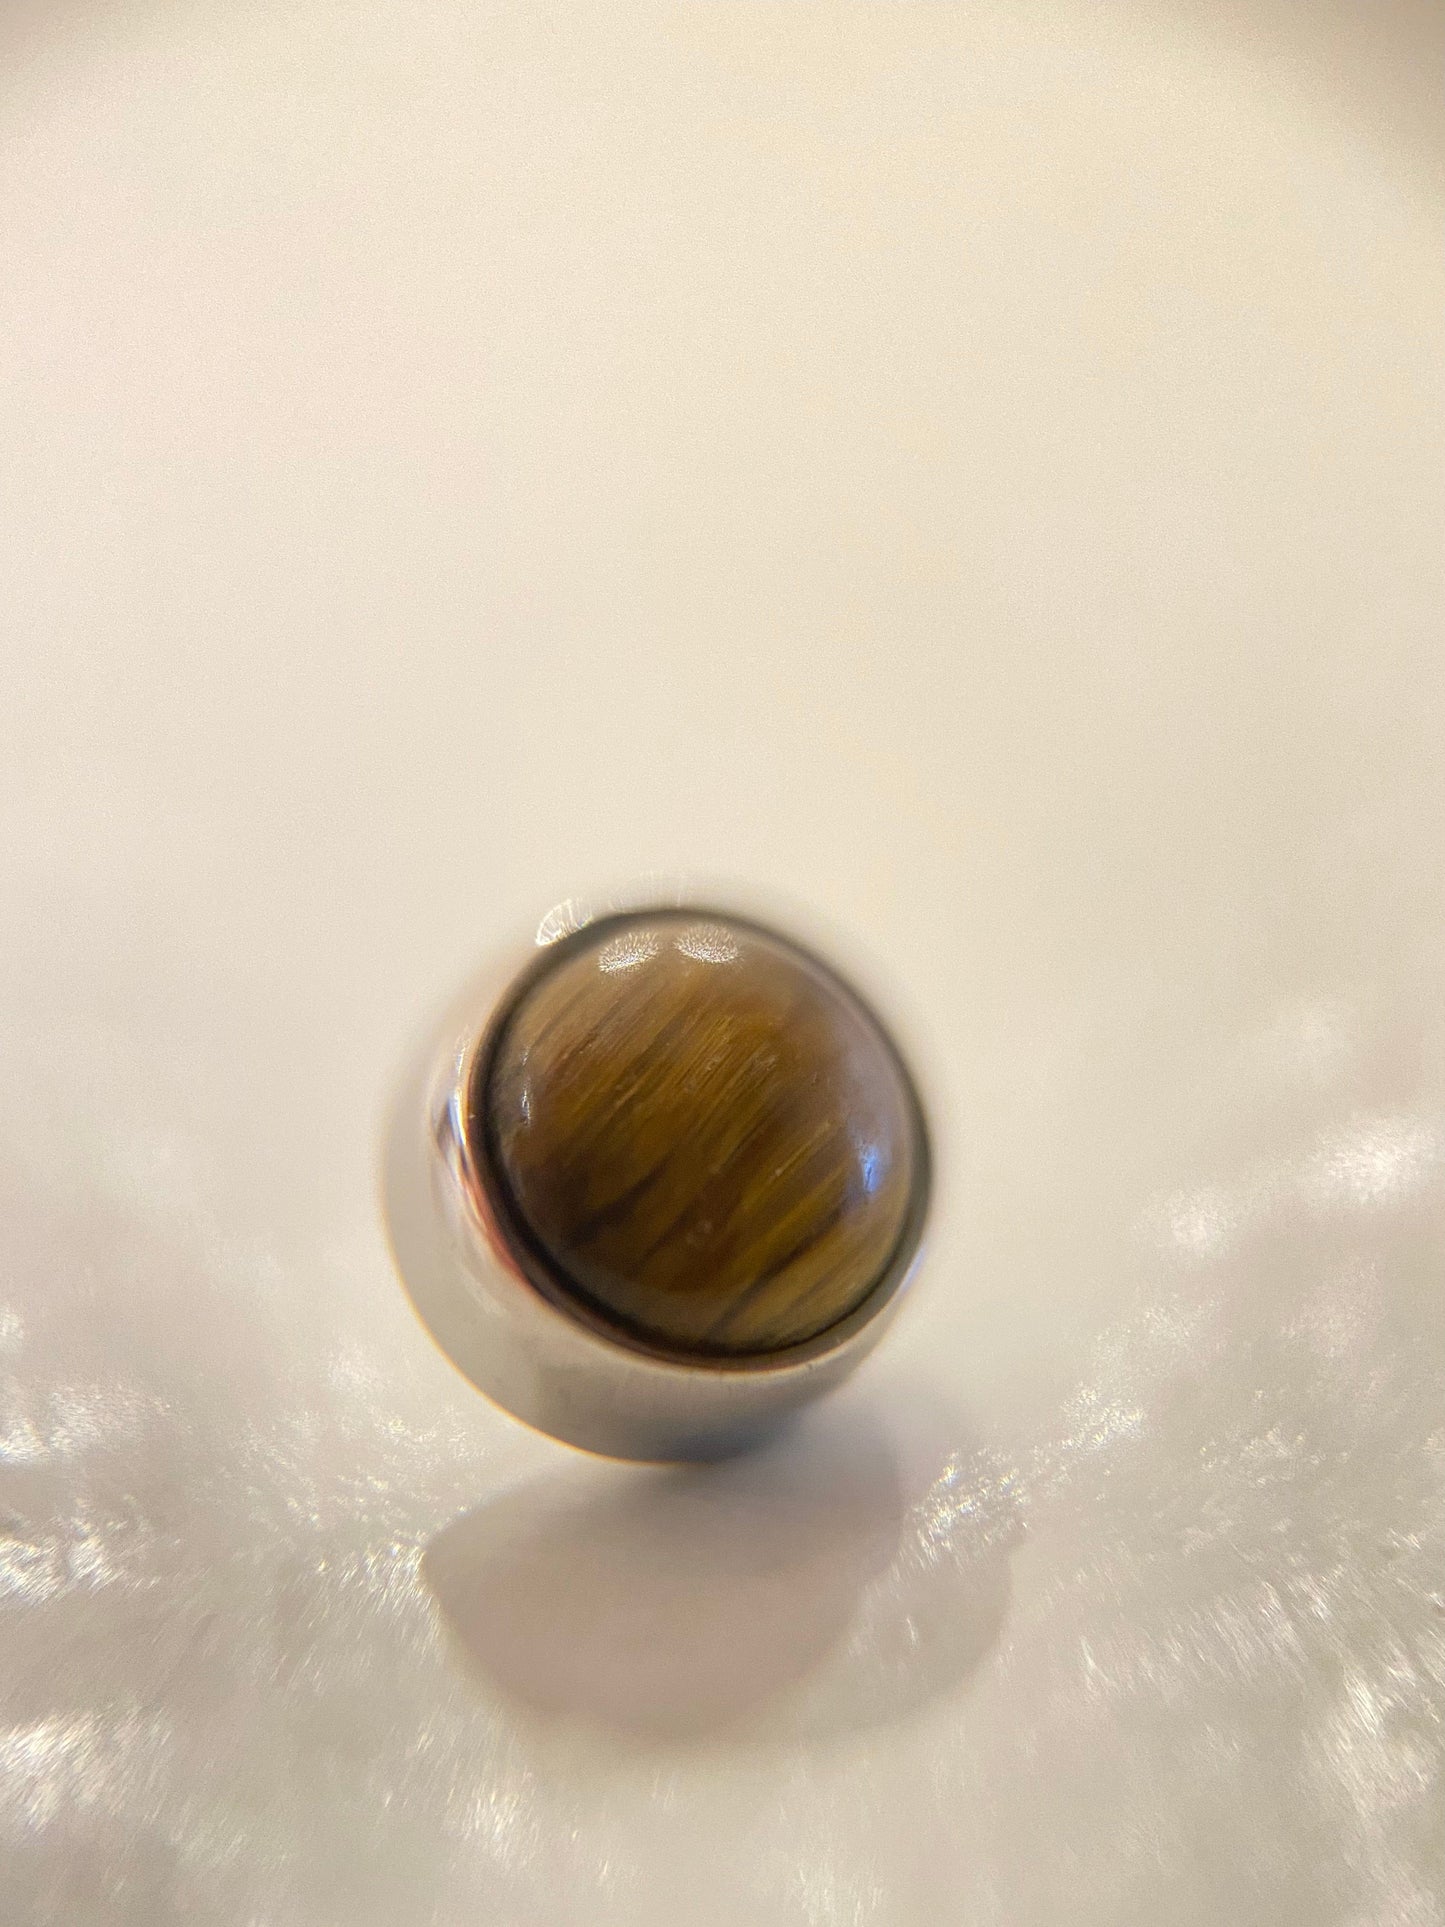 Industrial Strength Threaded Titanium Natural Stone Cabochon (Industrial Strength)